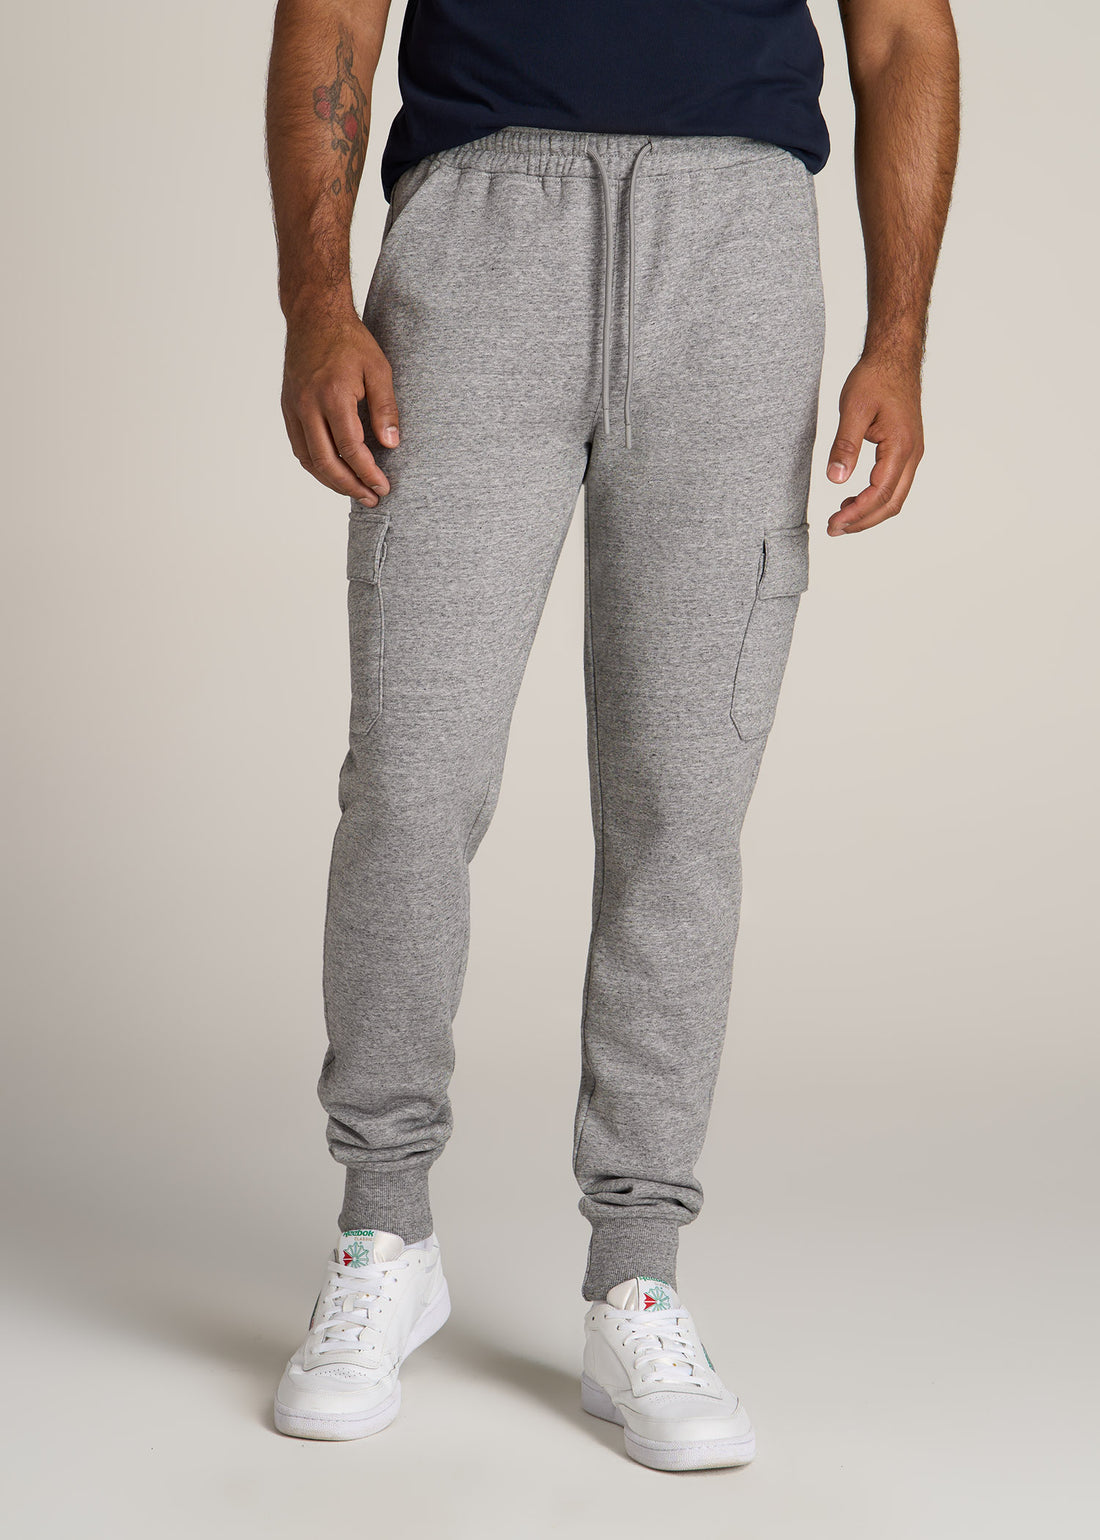 Grey Sweatpants Winter Outfits For Men (10 ideas & outfits)